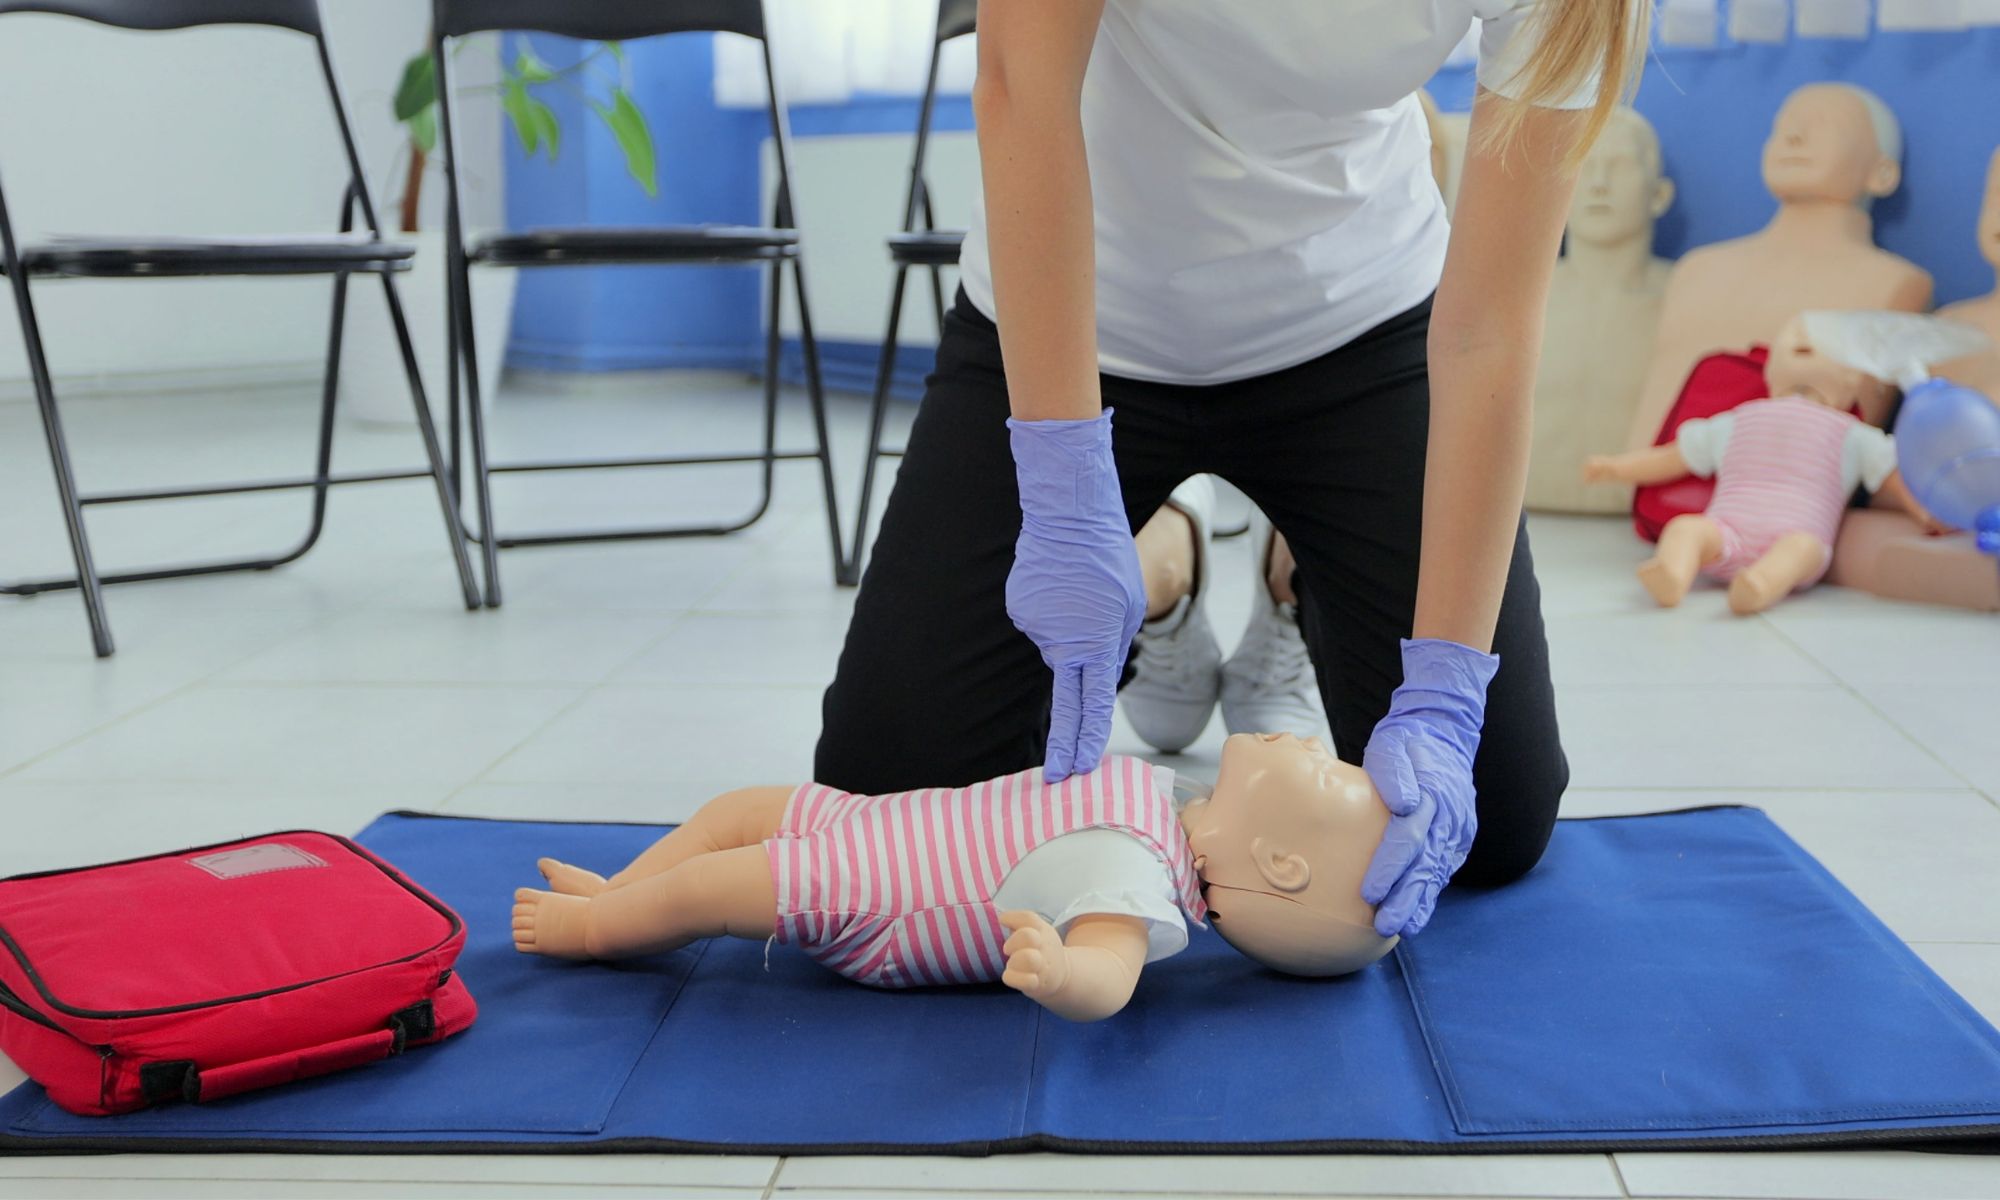 A woman demonstrates Paediatric first aid on a dummy baby